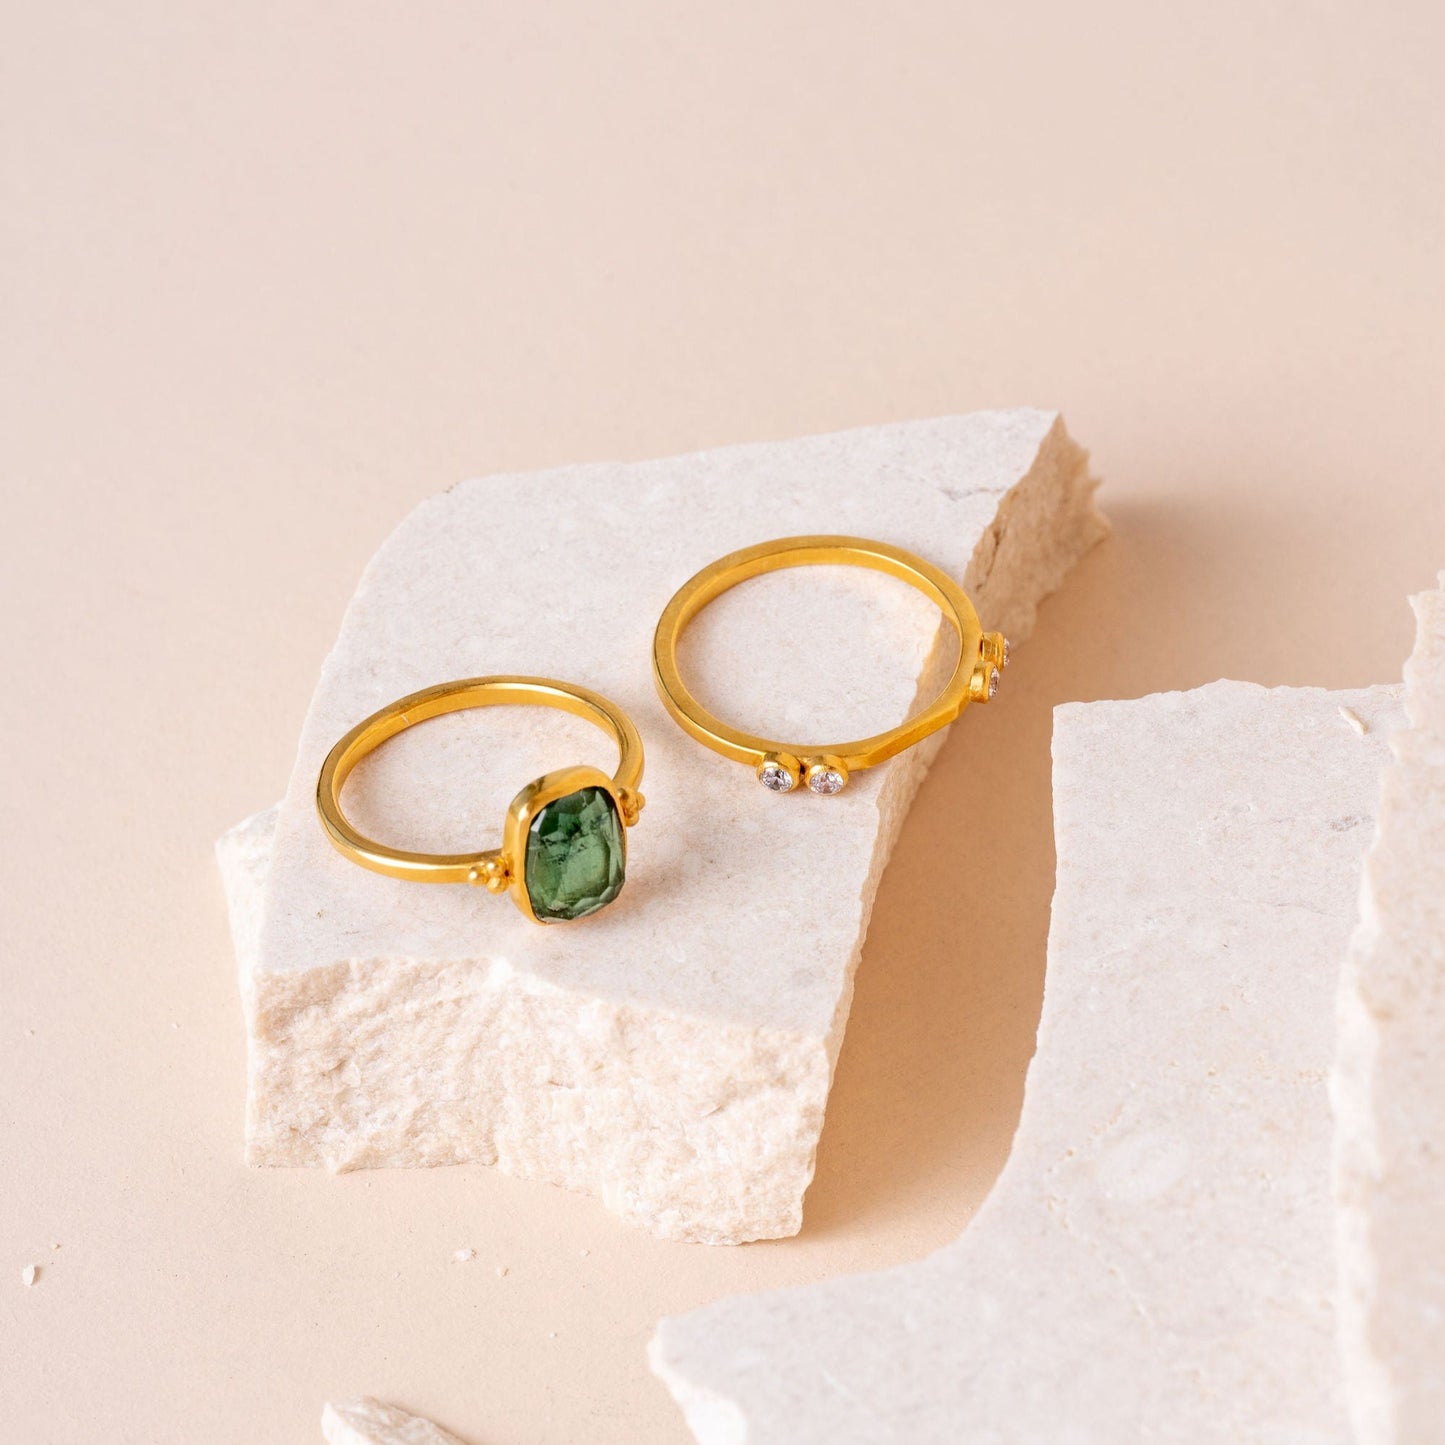 Group shot of exquisite gold rings, each adorned with meticulous granulation and complemented by the allure of green tourmaline gemstones